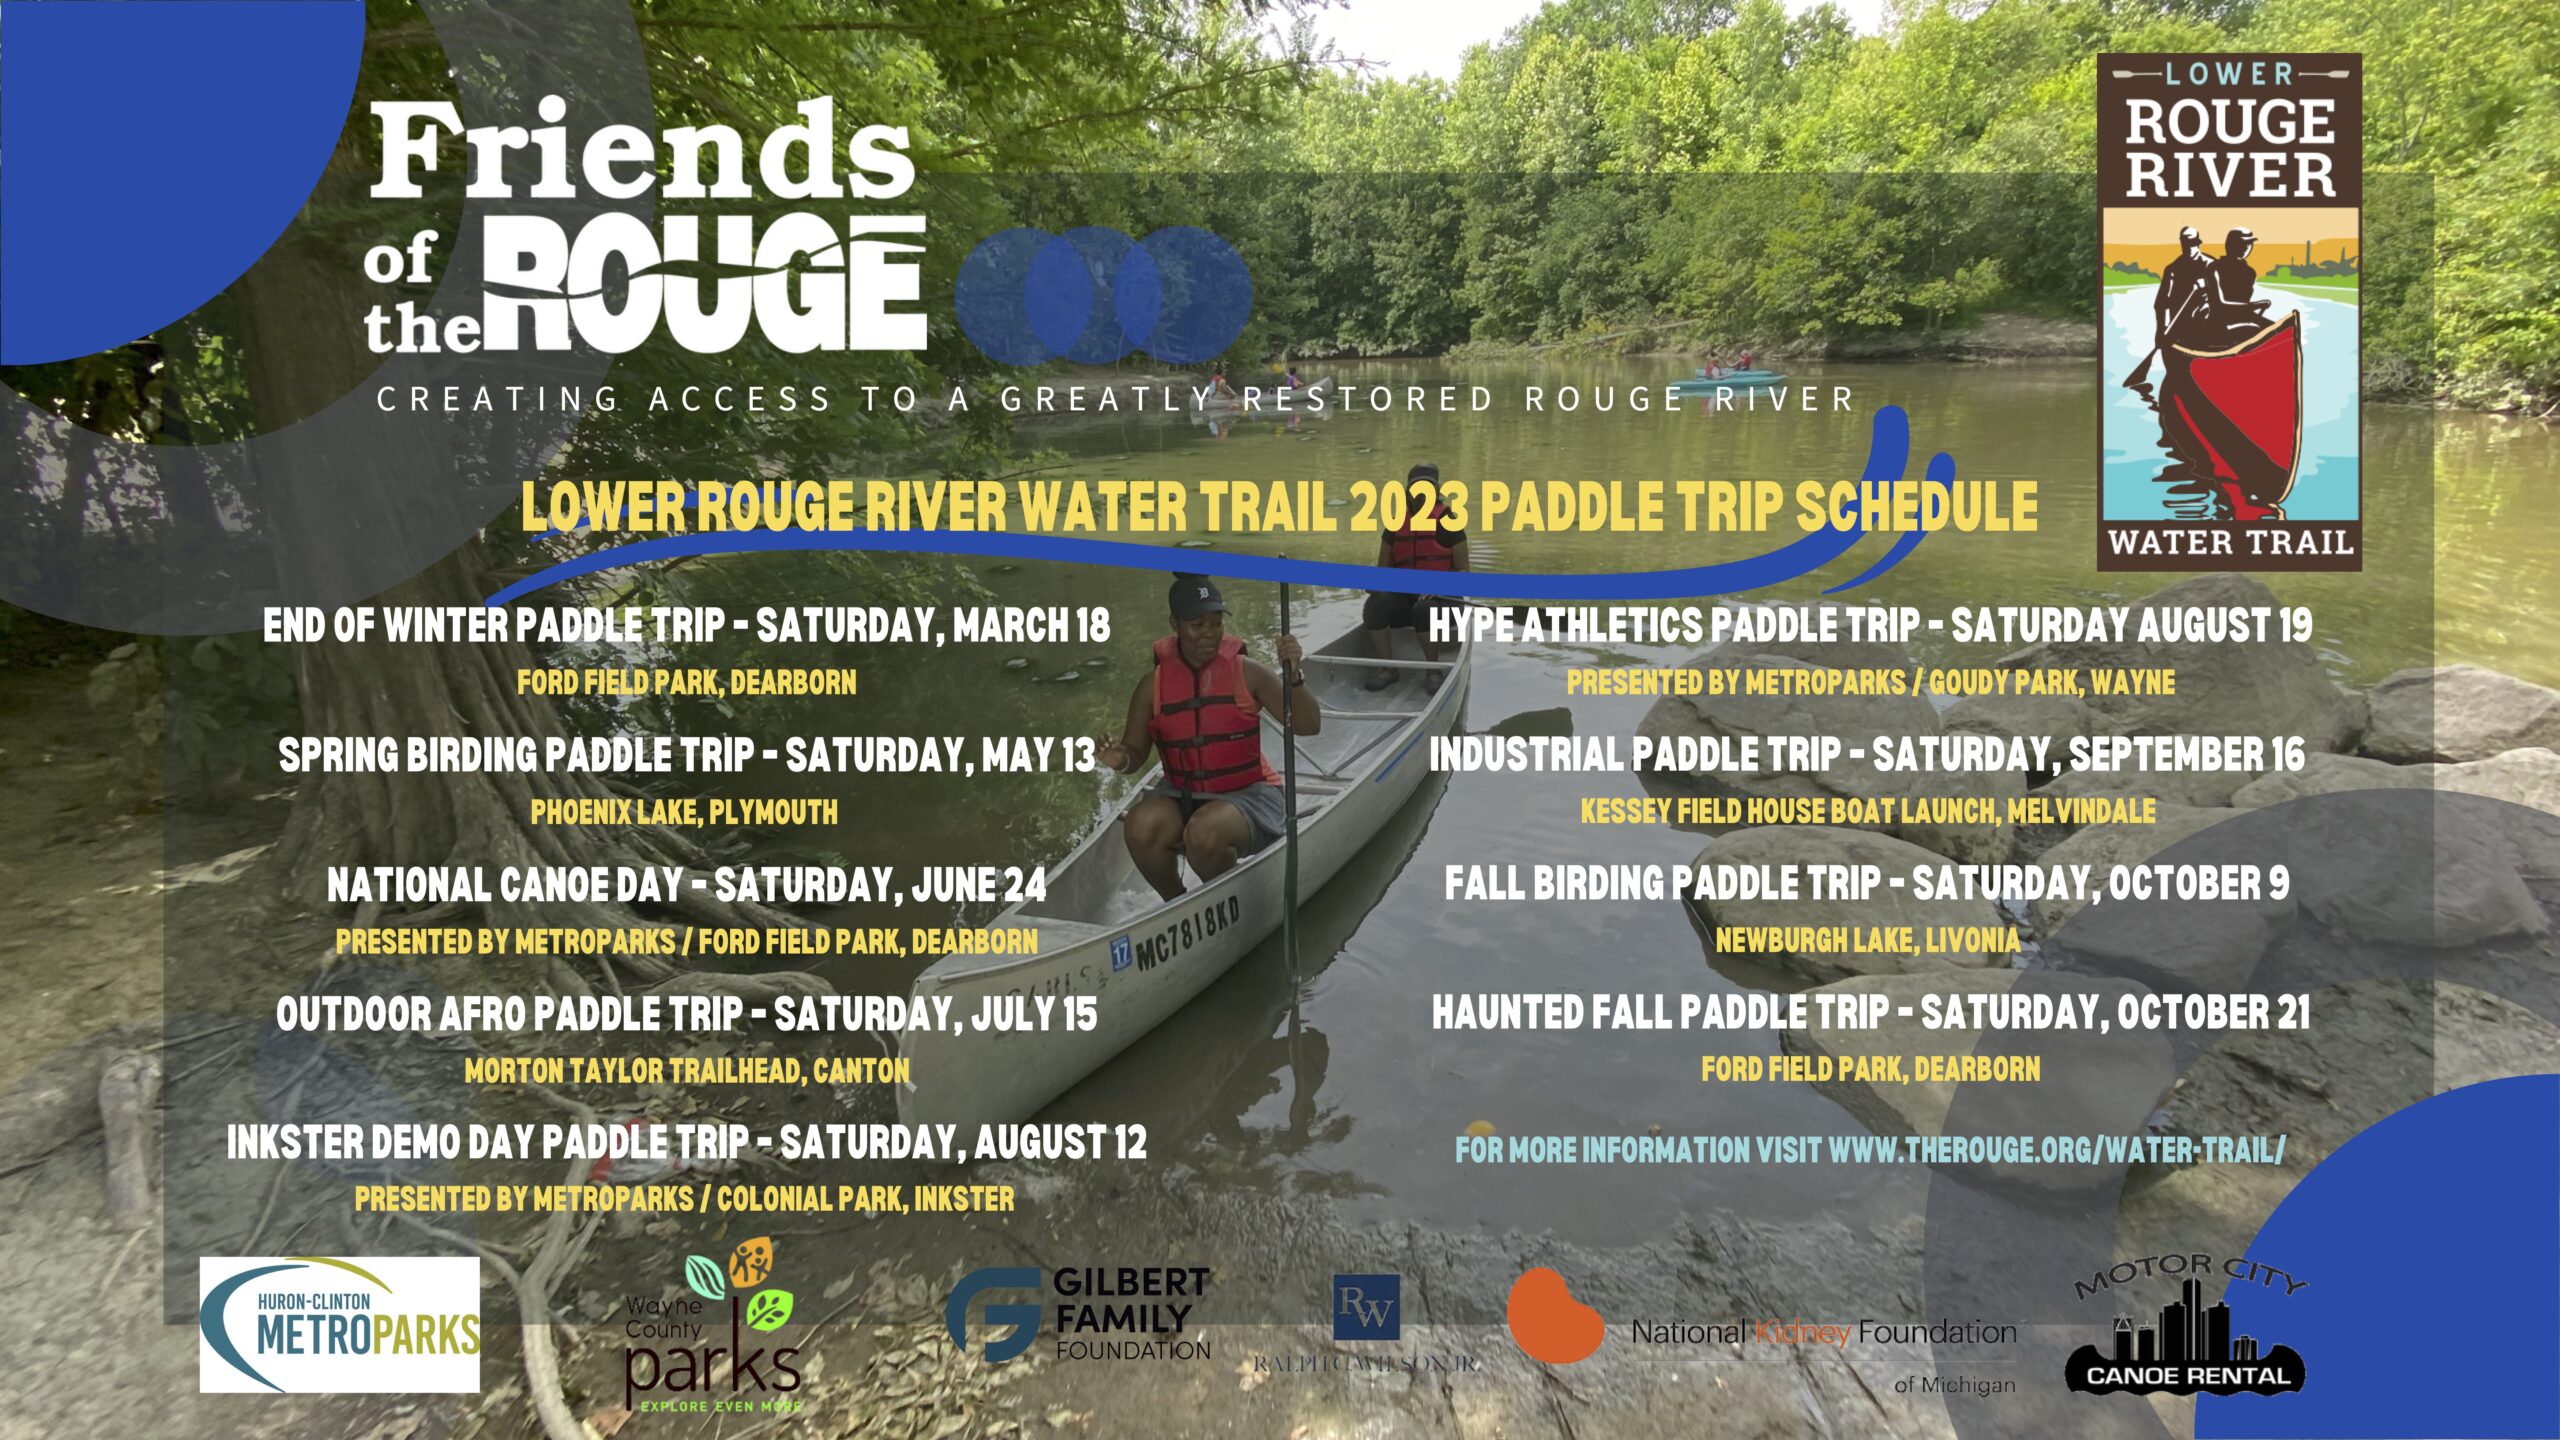 Lower Rouge River Water Trail Events Friends of the Rouge